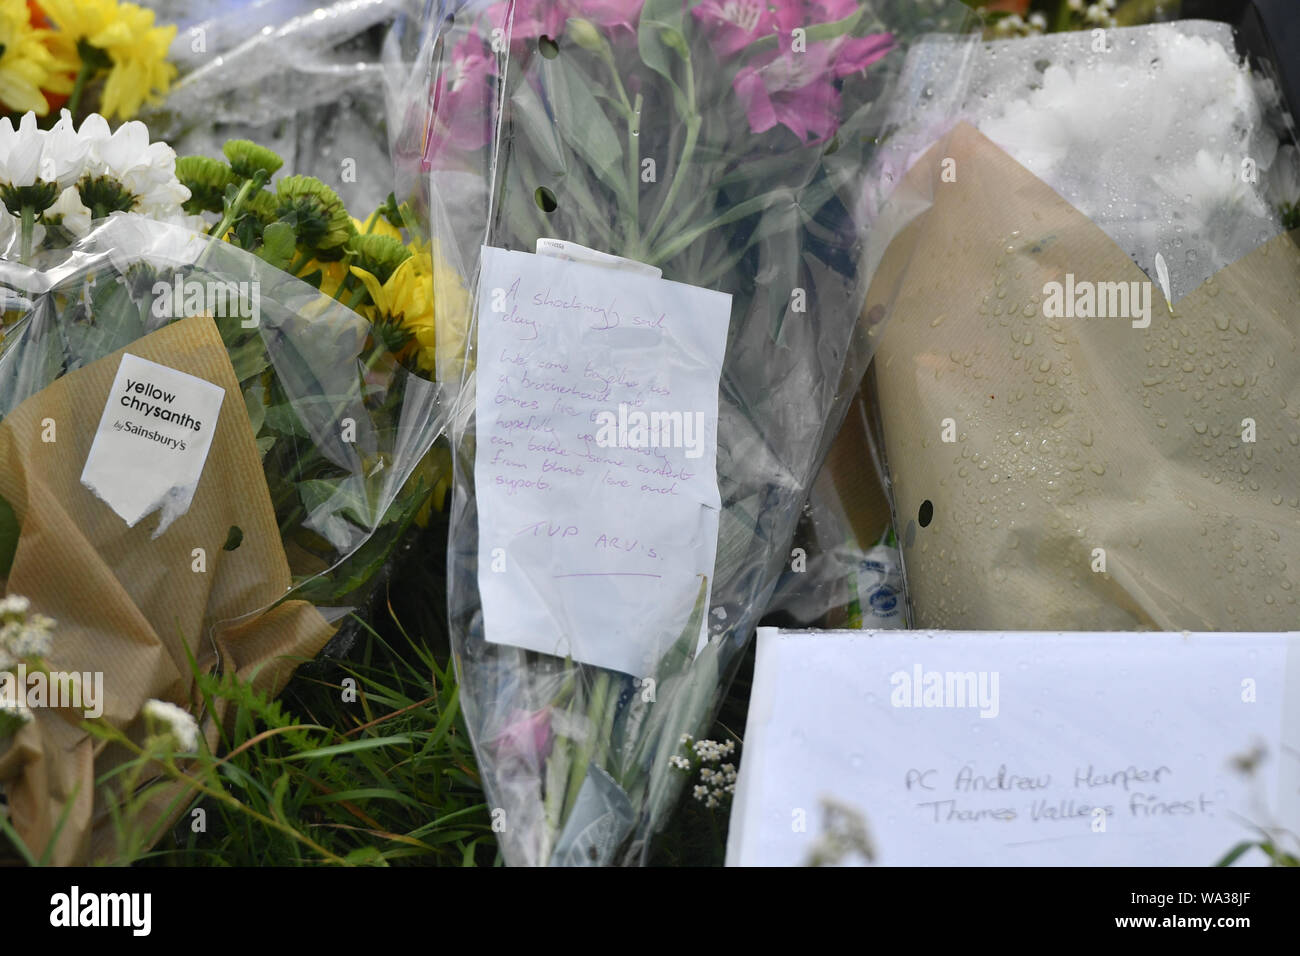 A messages on floral tributes at the scene, where Thames Valley Police officer Pc Andrew Harper, 28, died following a 'serious incident' at about 11.30pm on Thursday near the A4 Bath Road, between Reading and Newbury, at the village of Sulhamstead in Berkshire. Stock Photo